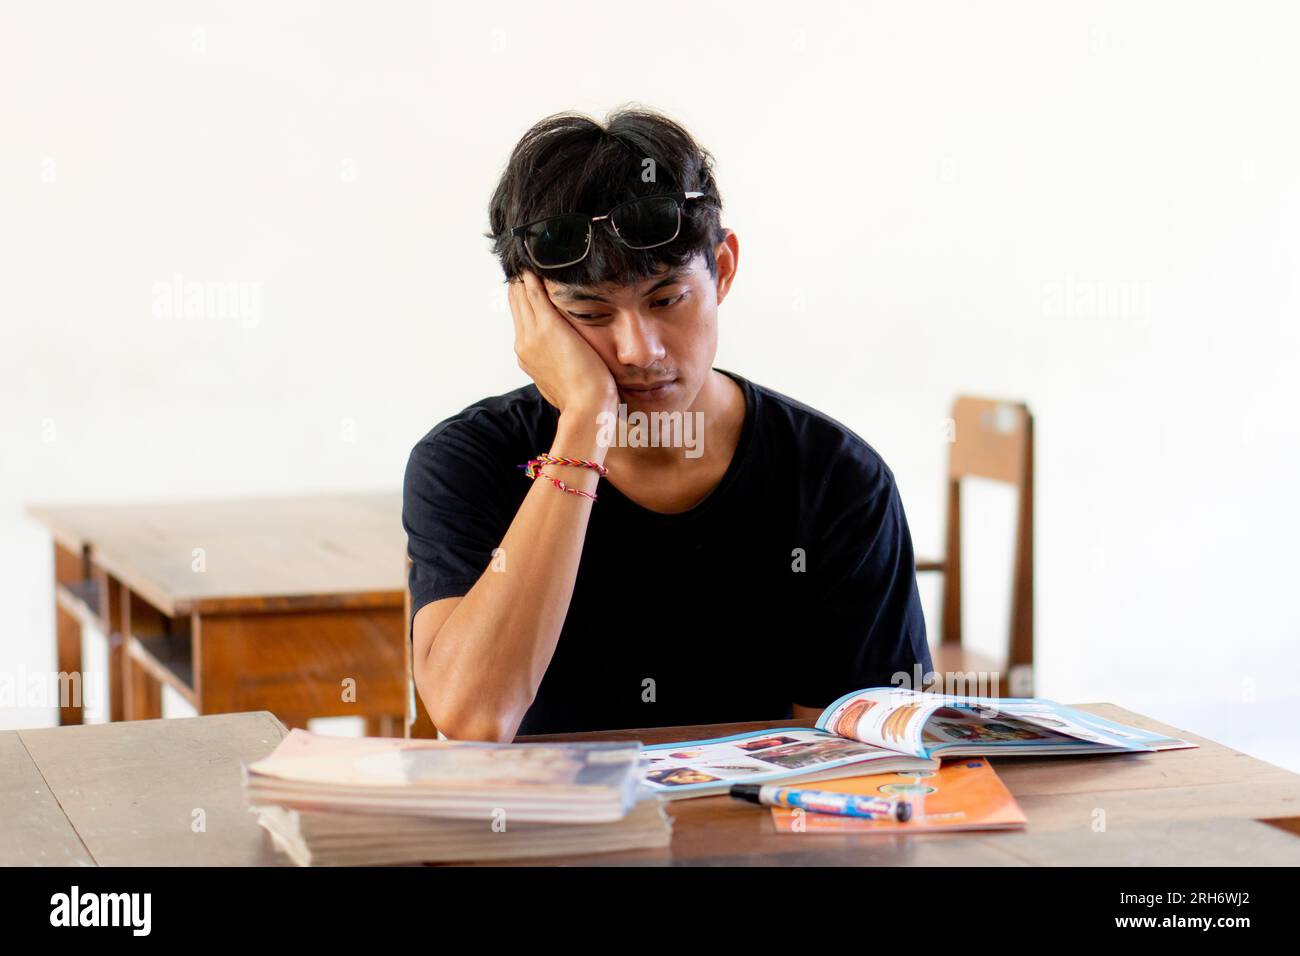 Overworked and tired high school student man studying feeling depressed and desperate Stock Photo